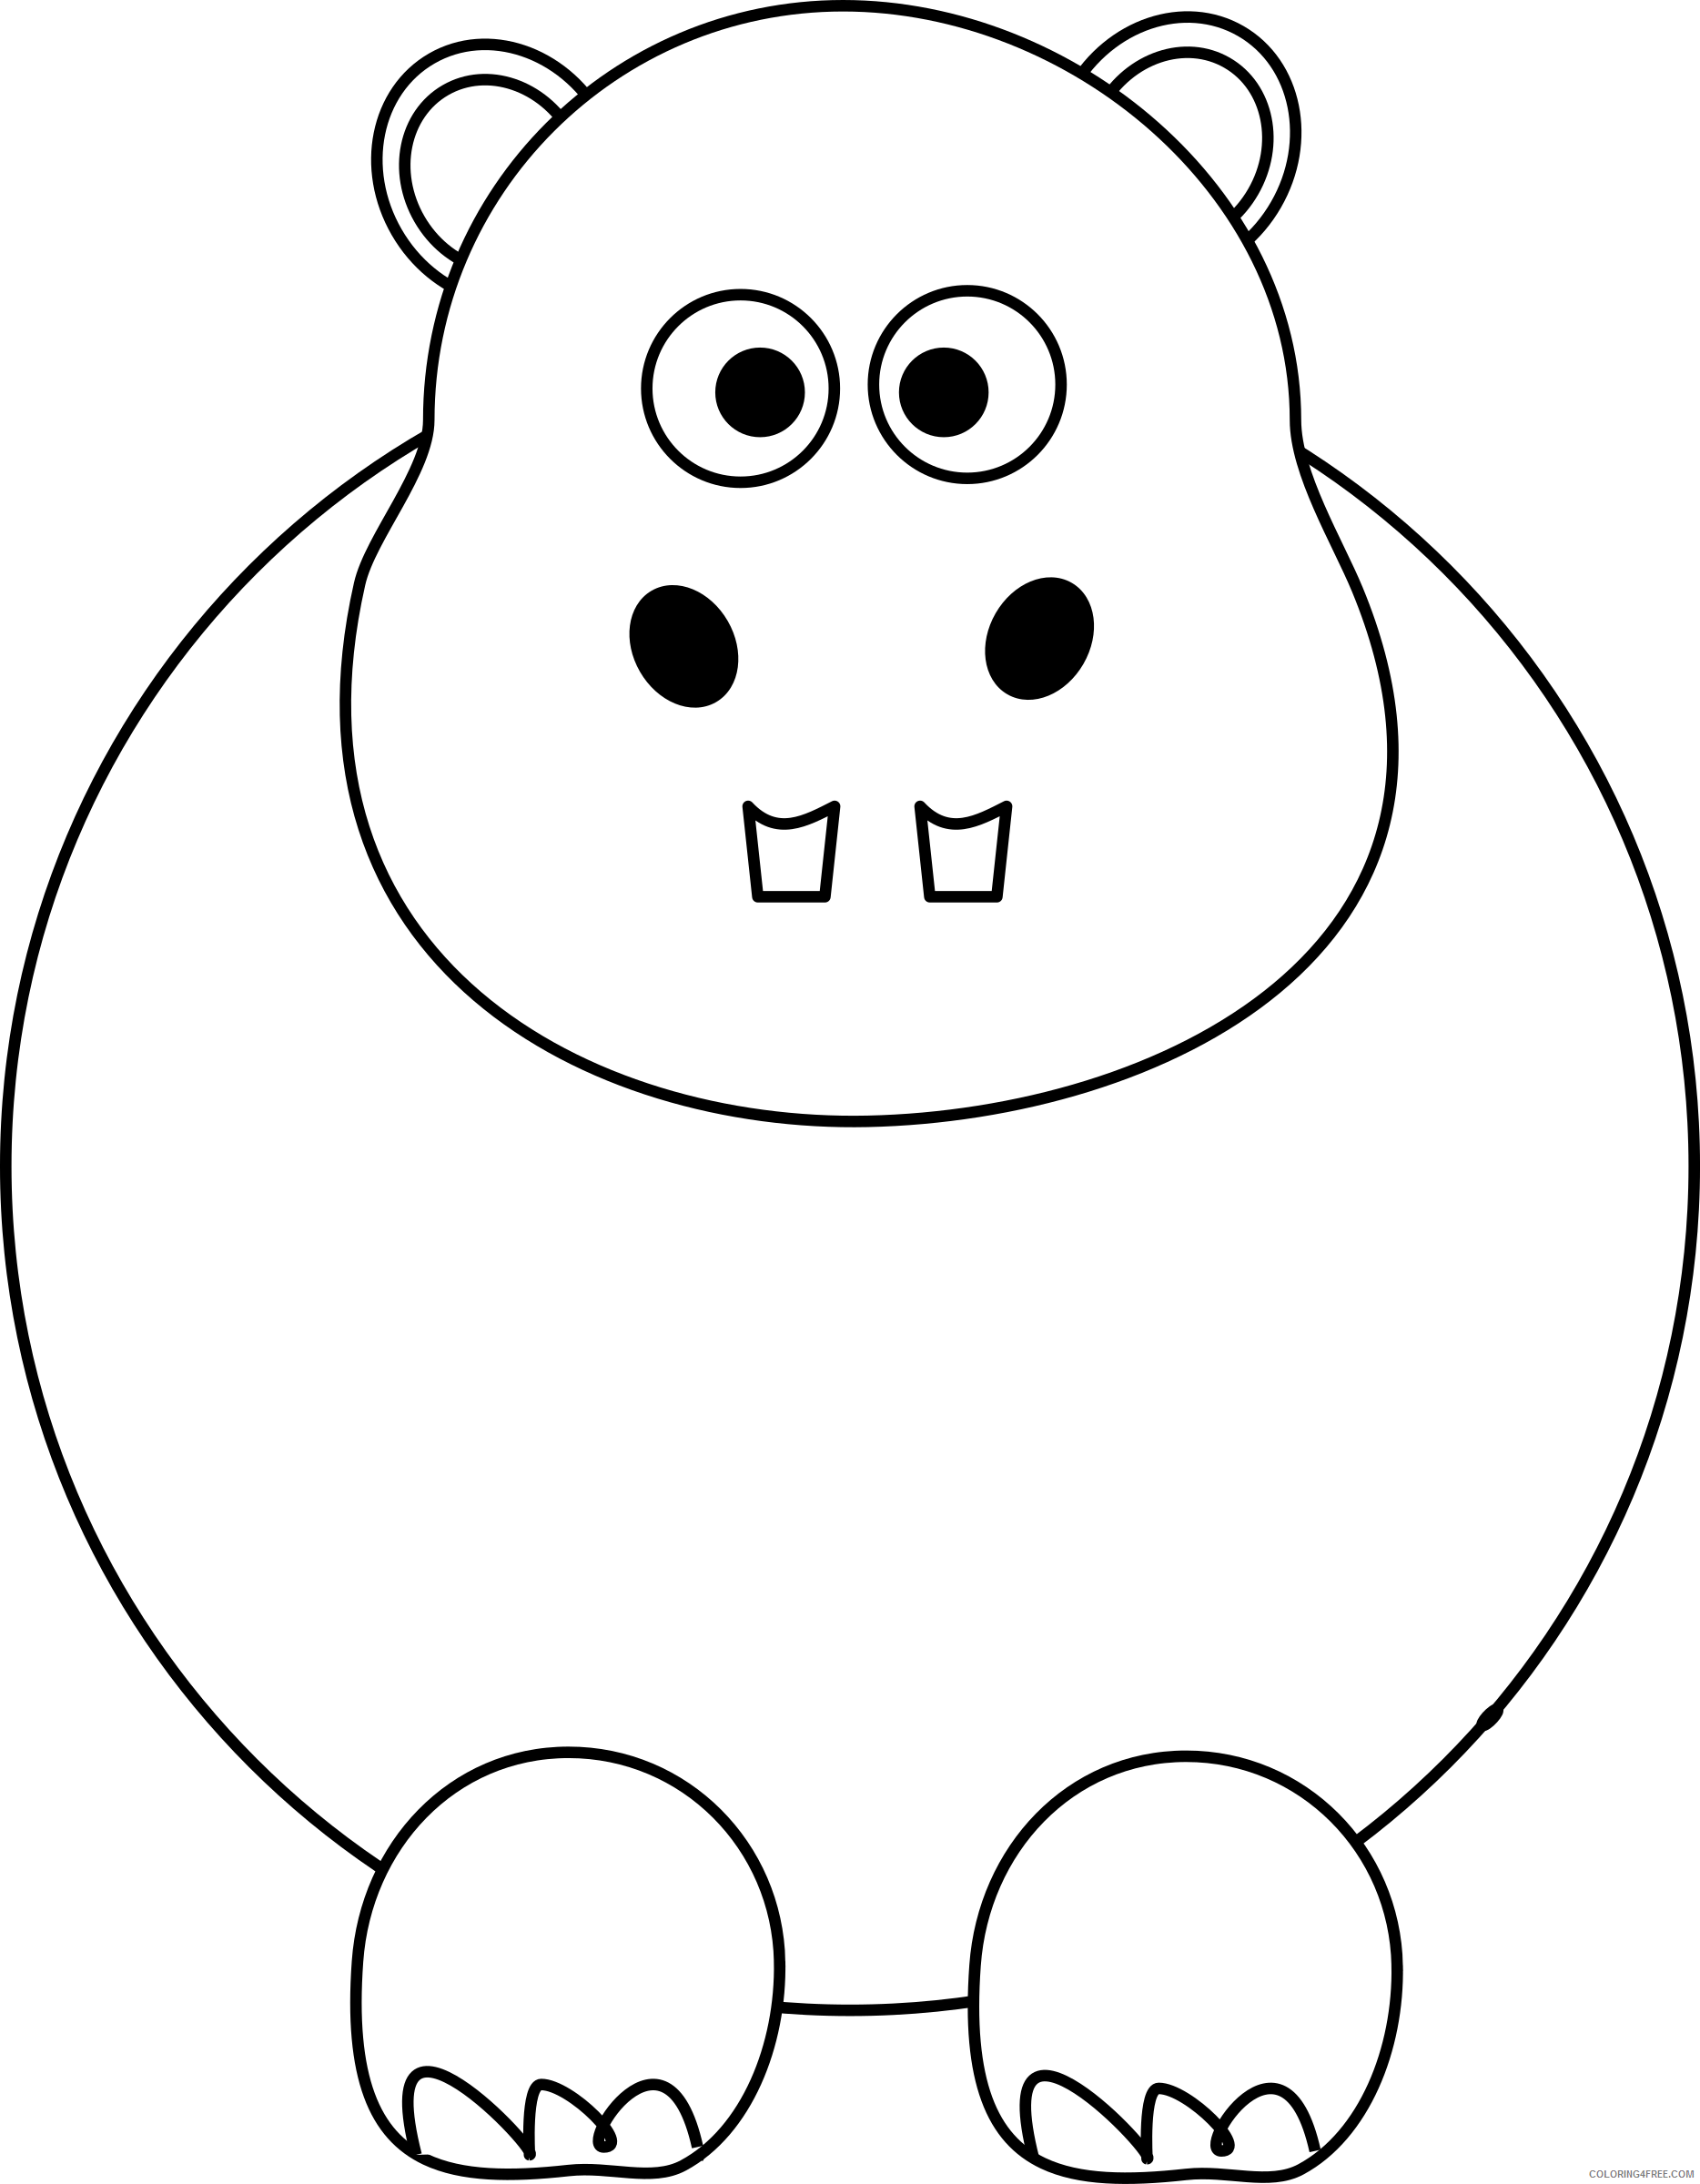 Hippo Outline Coloring Pages hippo 4 Printable Coloring4free